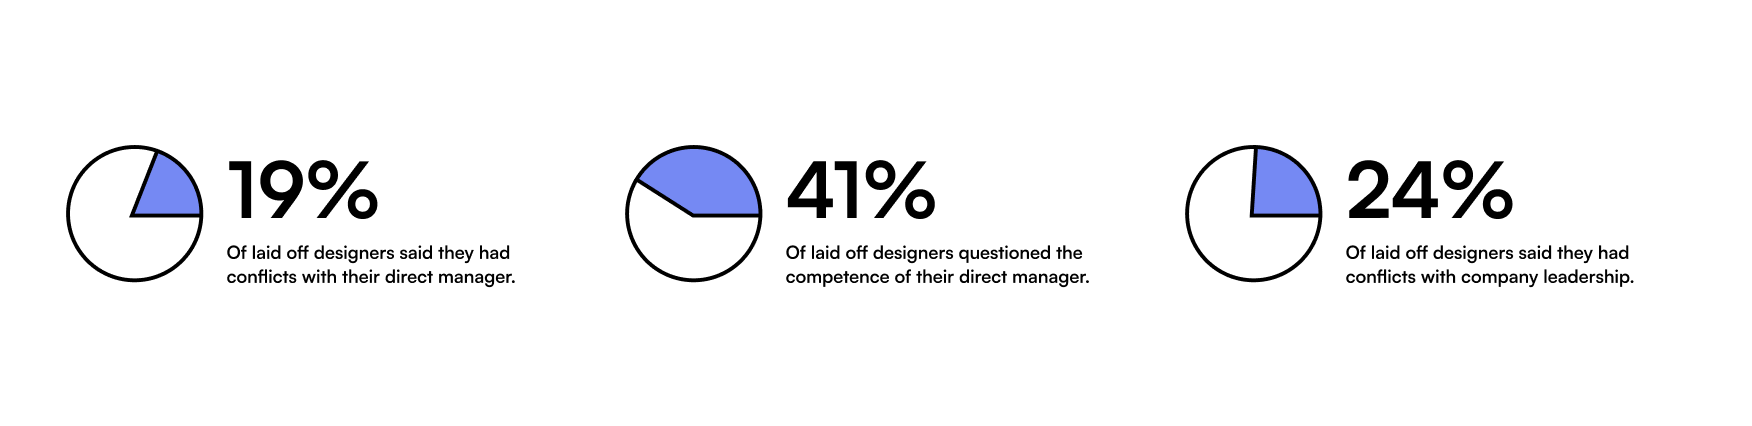 One-fifth of designers said they had conflicts with their manager and one-fourth with company leadership. 41% of them questioned the competence of their manager.